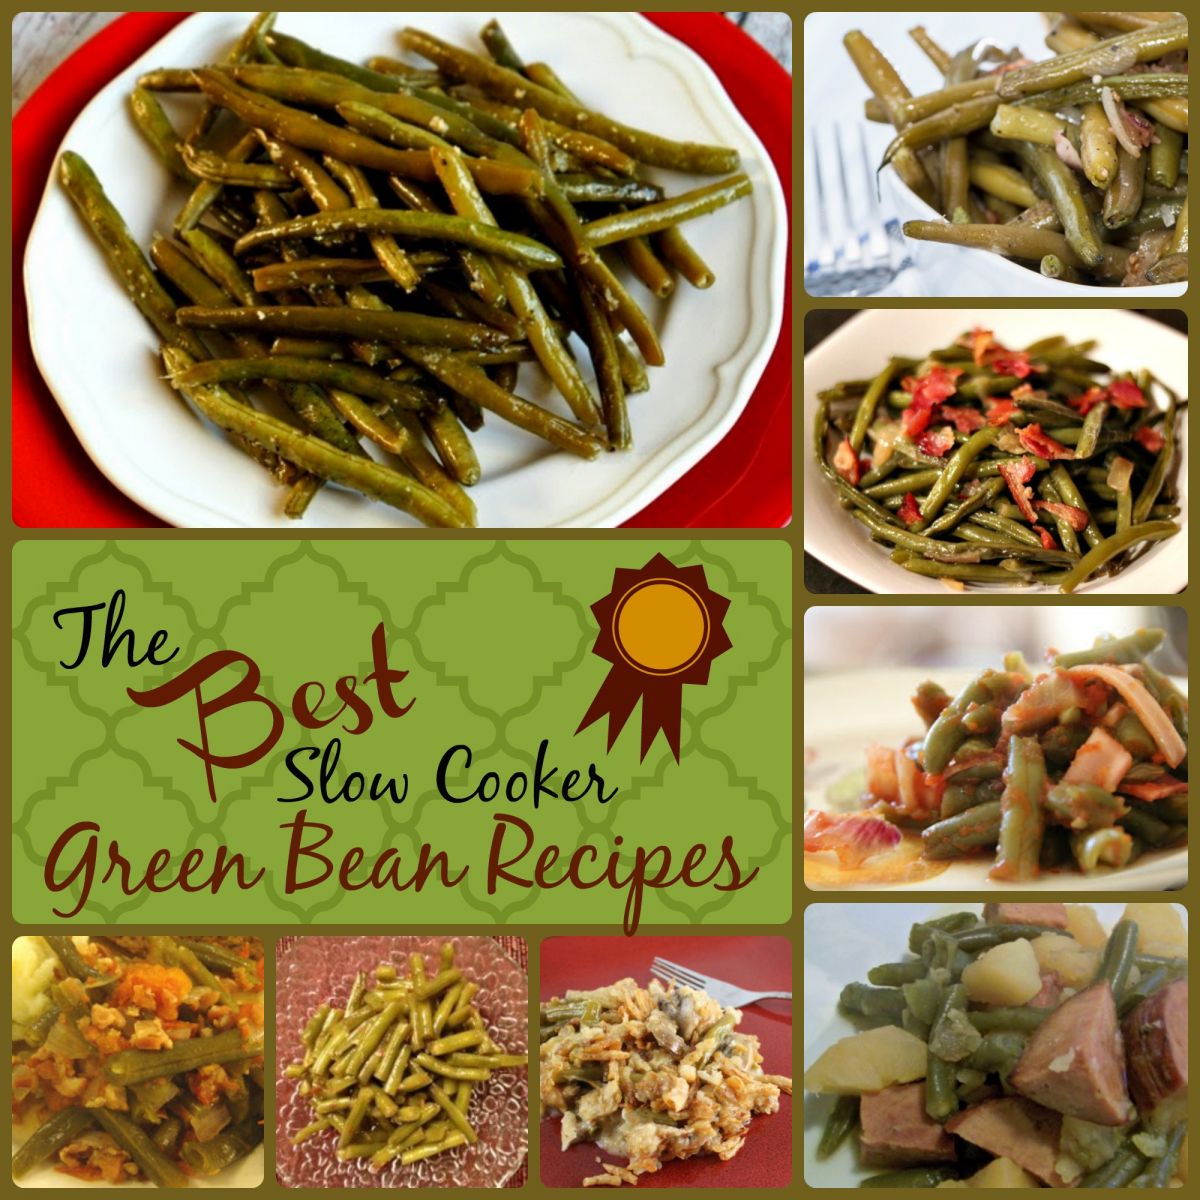 The Best Slow Cooker Green Bean Recipes